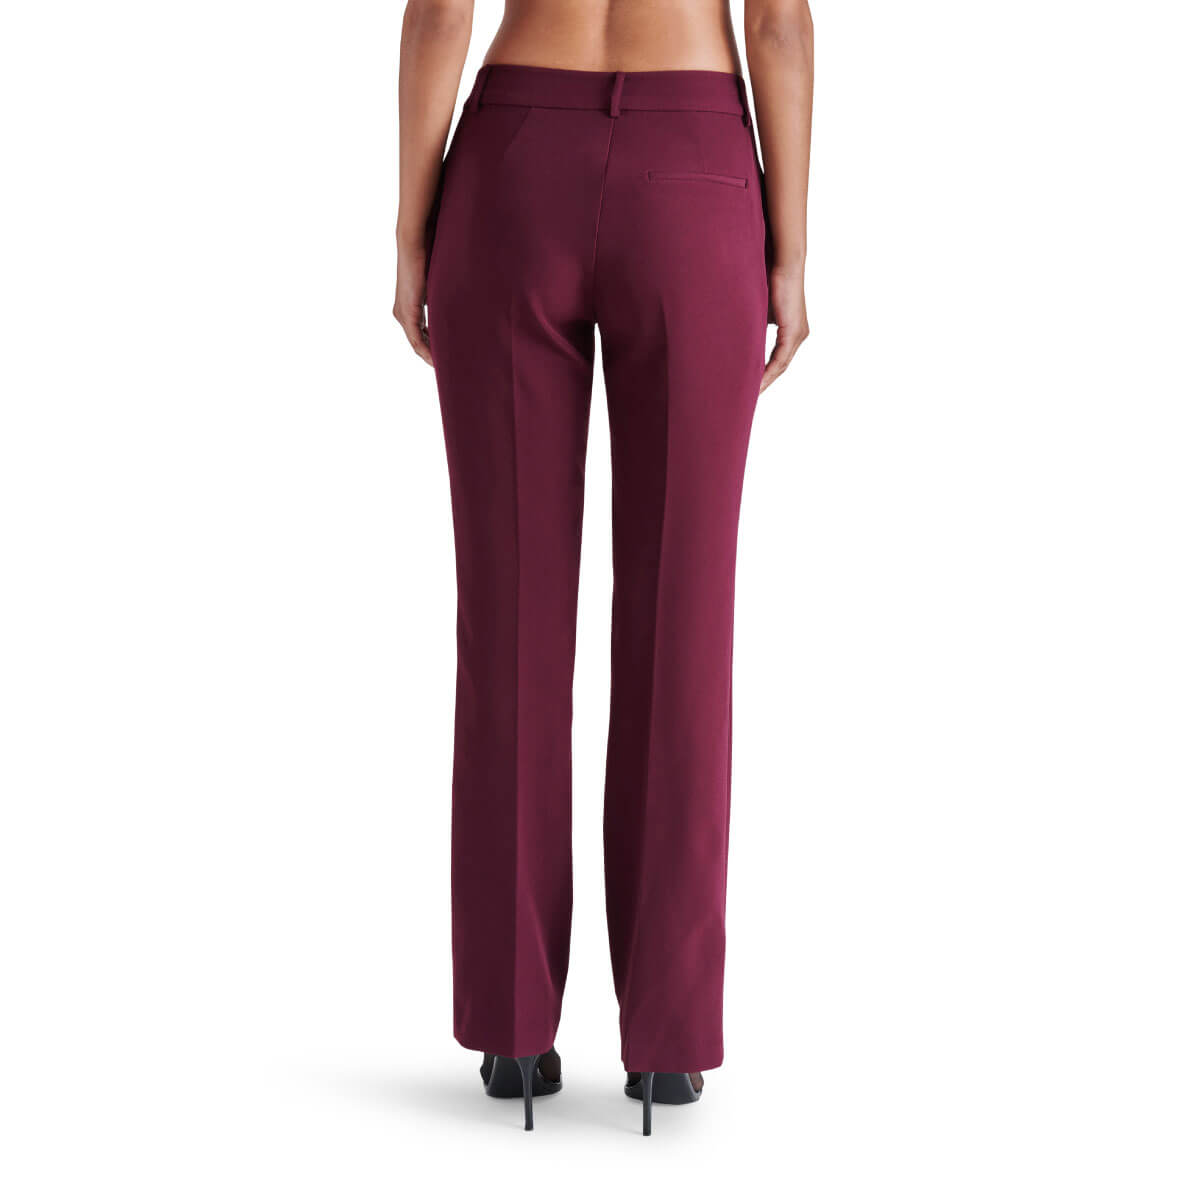 Steve Madden Waverly Pants fig back | MILK MONEY milkmoney.co | cute clothes for women. womens online clothing. trendy online clothing stores. womens casual clothing online. trendy clothes online. trendy women's clothing online. ladies online clothing stores. trendy women's clothing stores. cute female clothes.